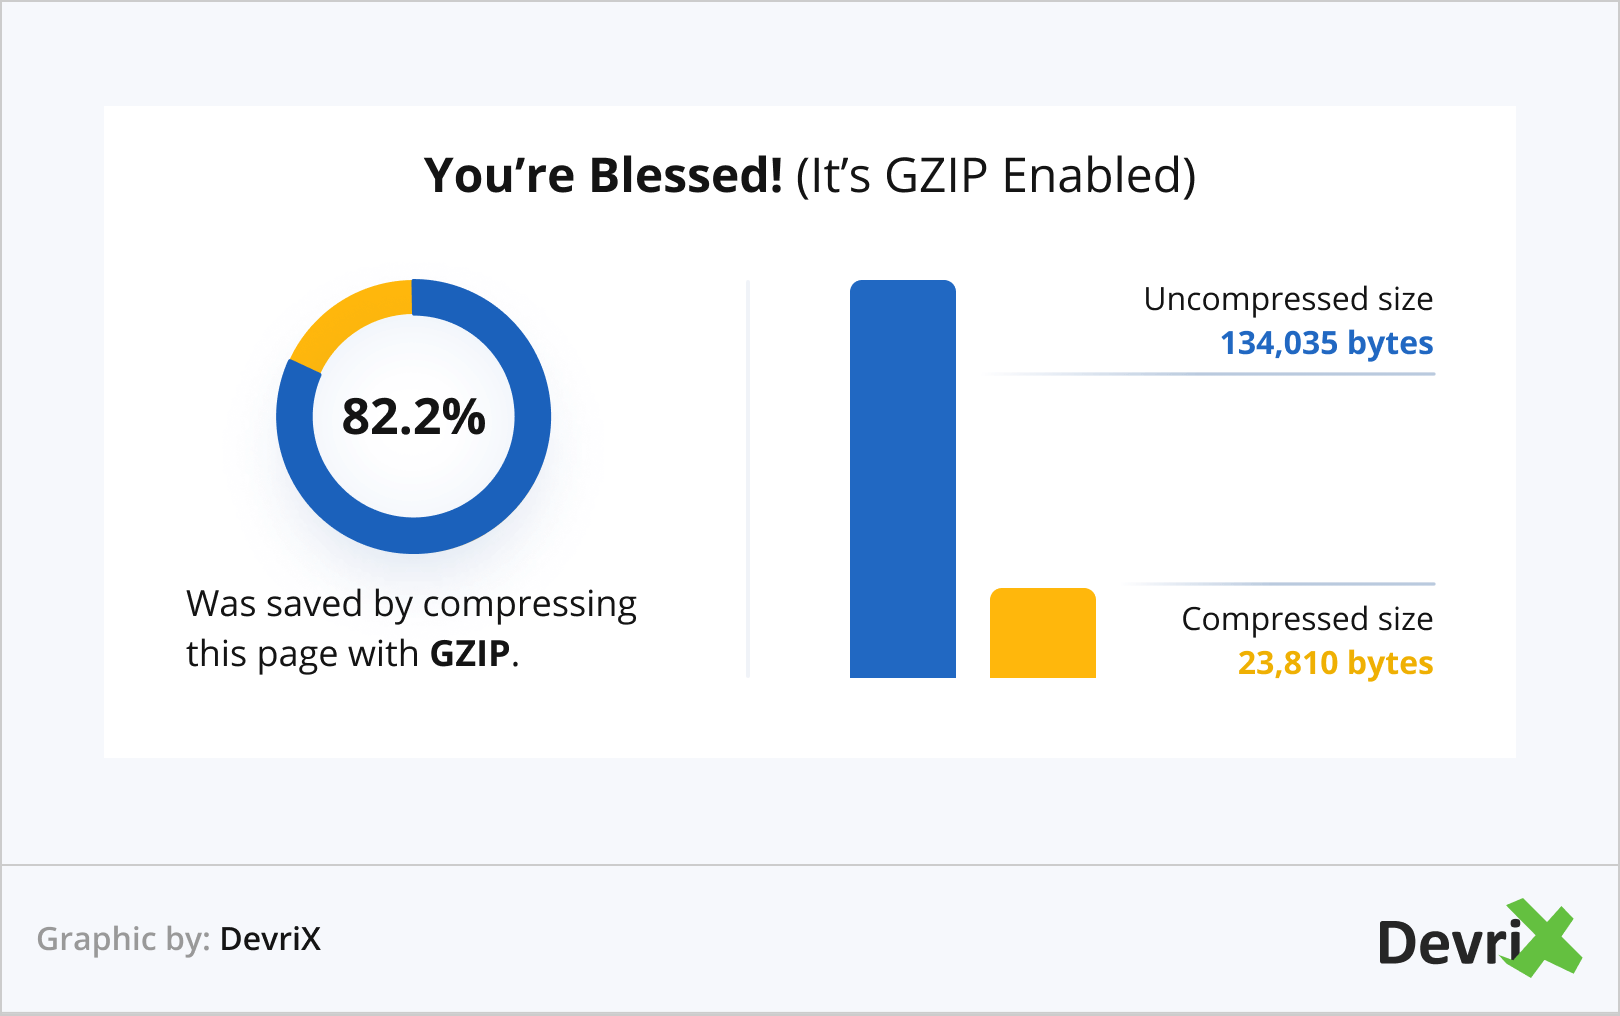 You’re Blessed! (It’s GZIP Enabled)